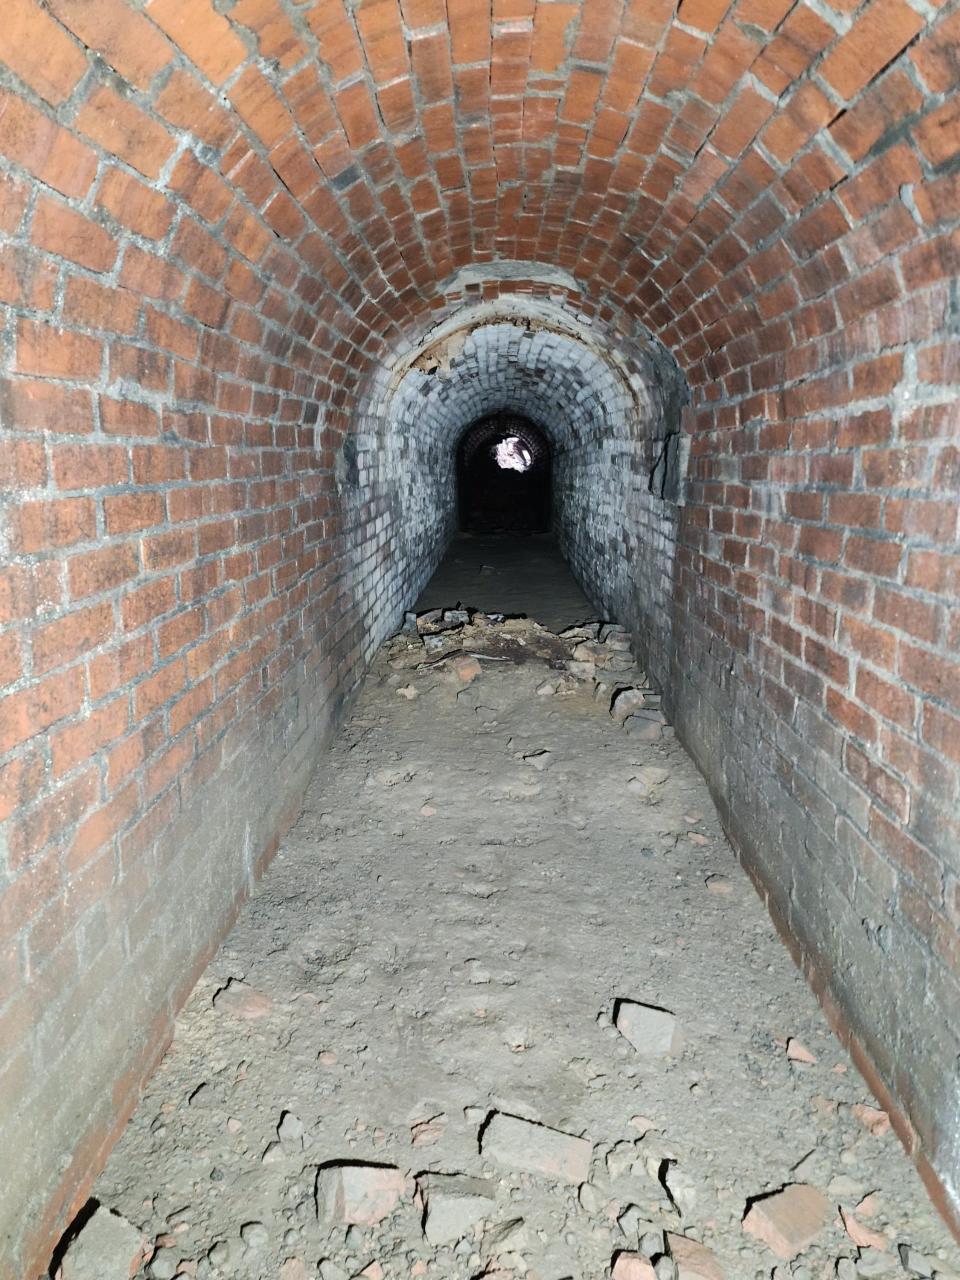 The tunnel hidden for well over a century beneath the Merrick Art Gallery property.